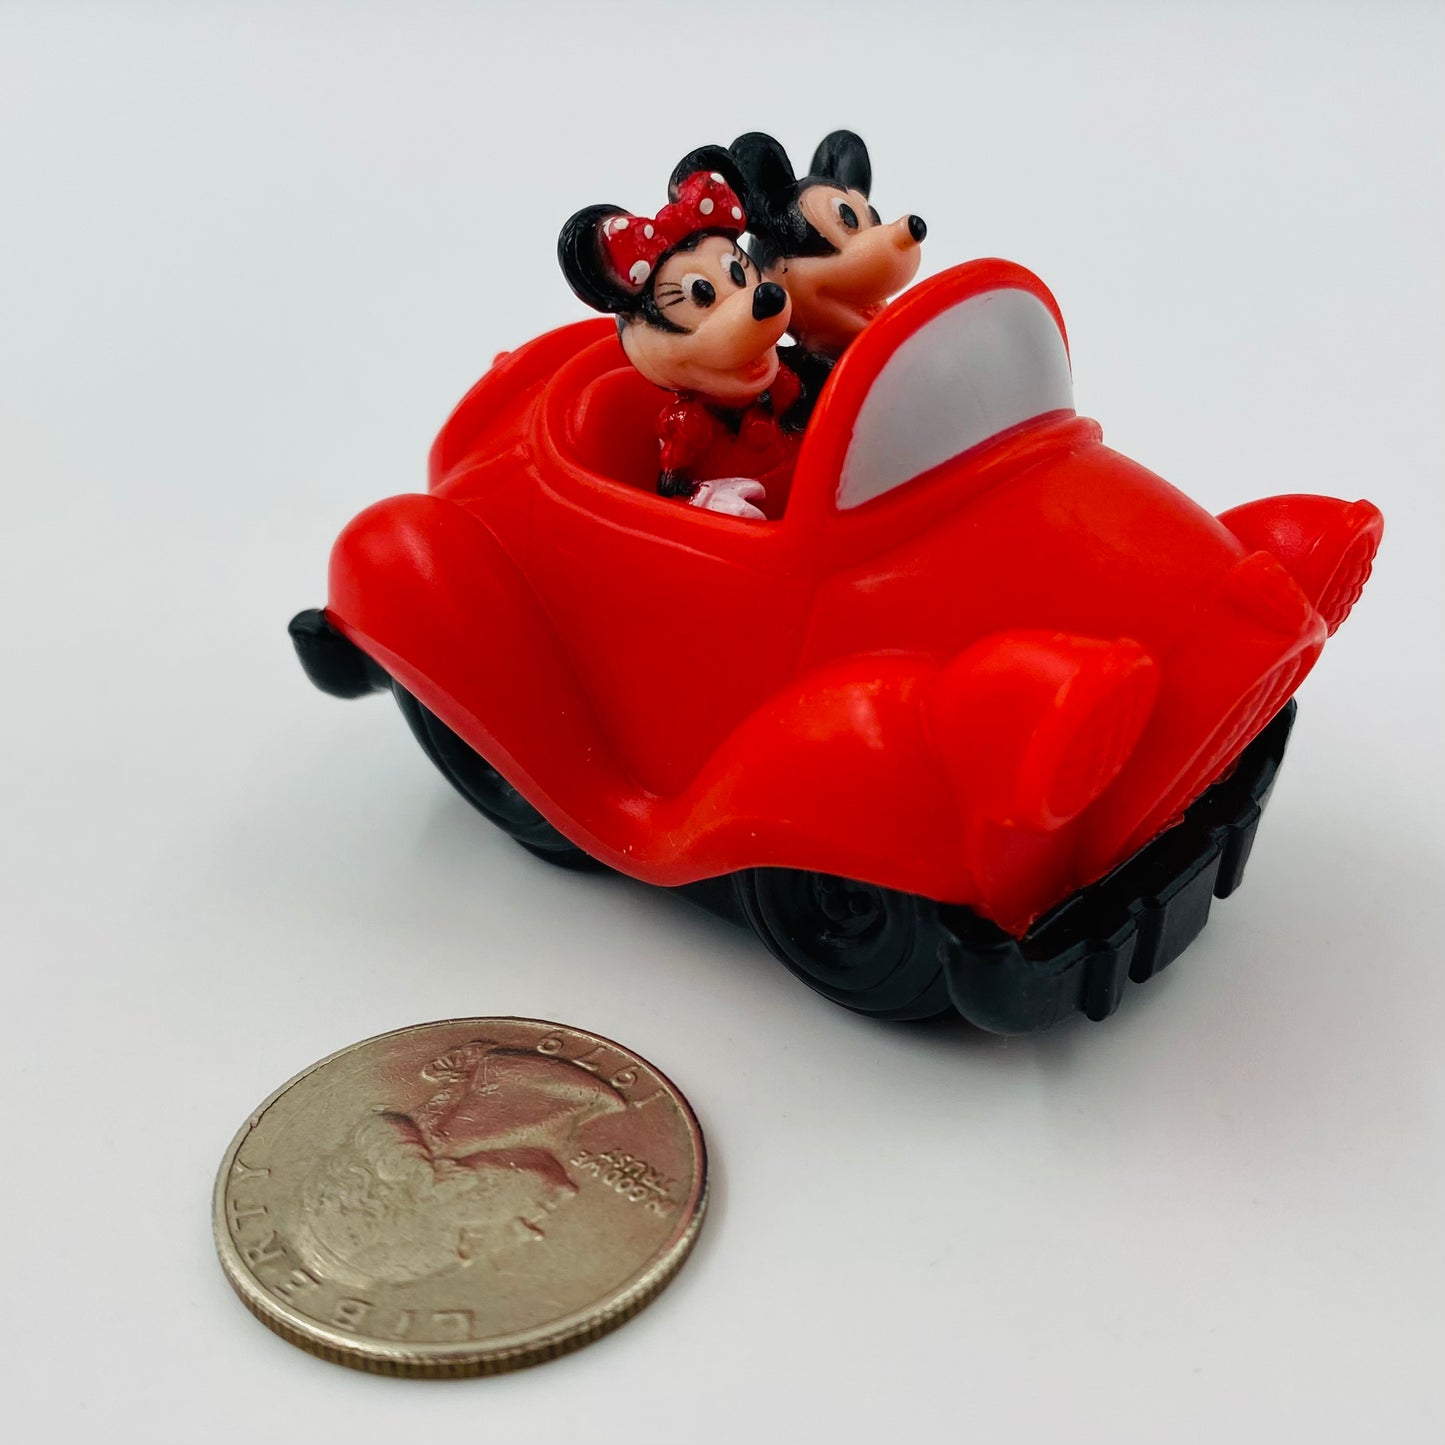 Mickey's Toontown Disneyland Mickey Mouse & Minnie Mouse wind up car Burger King Kids' Meal toy (1993) loose